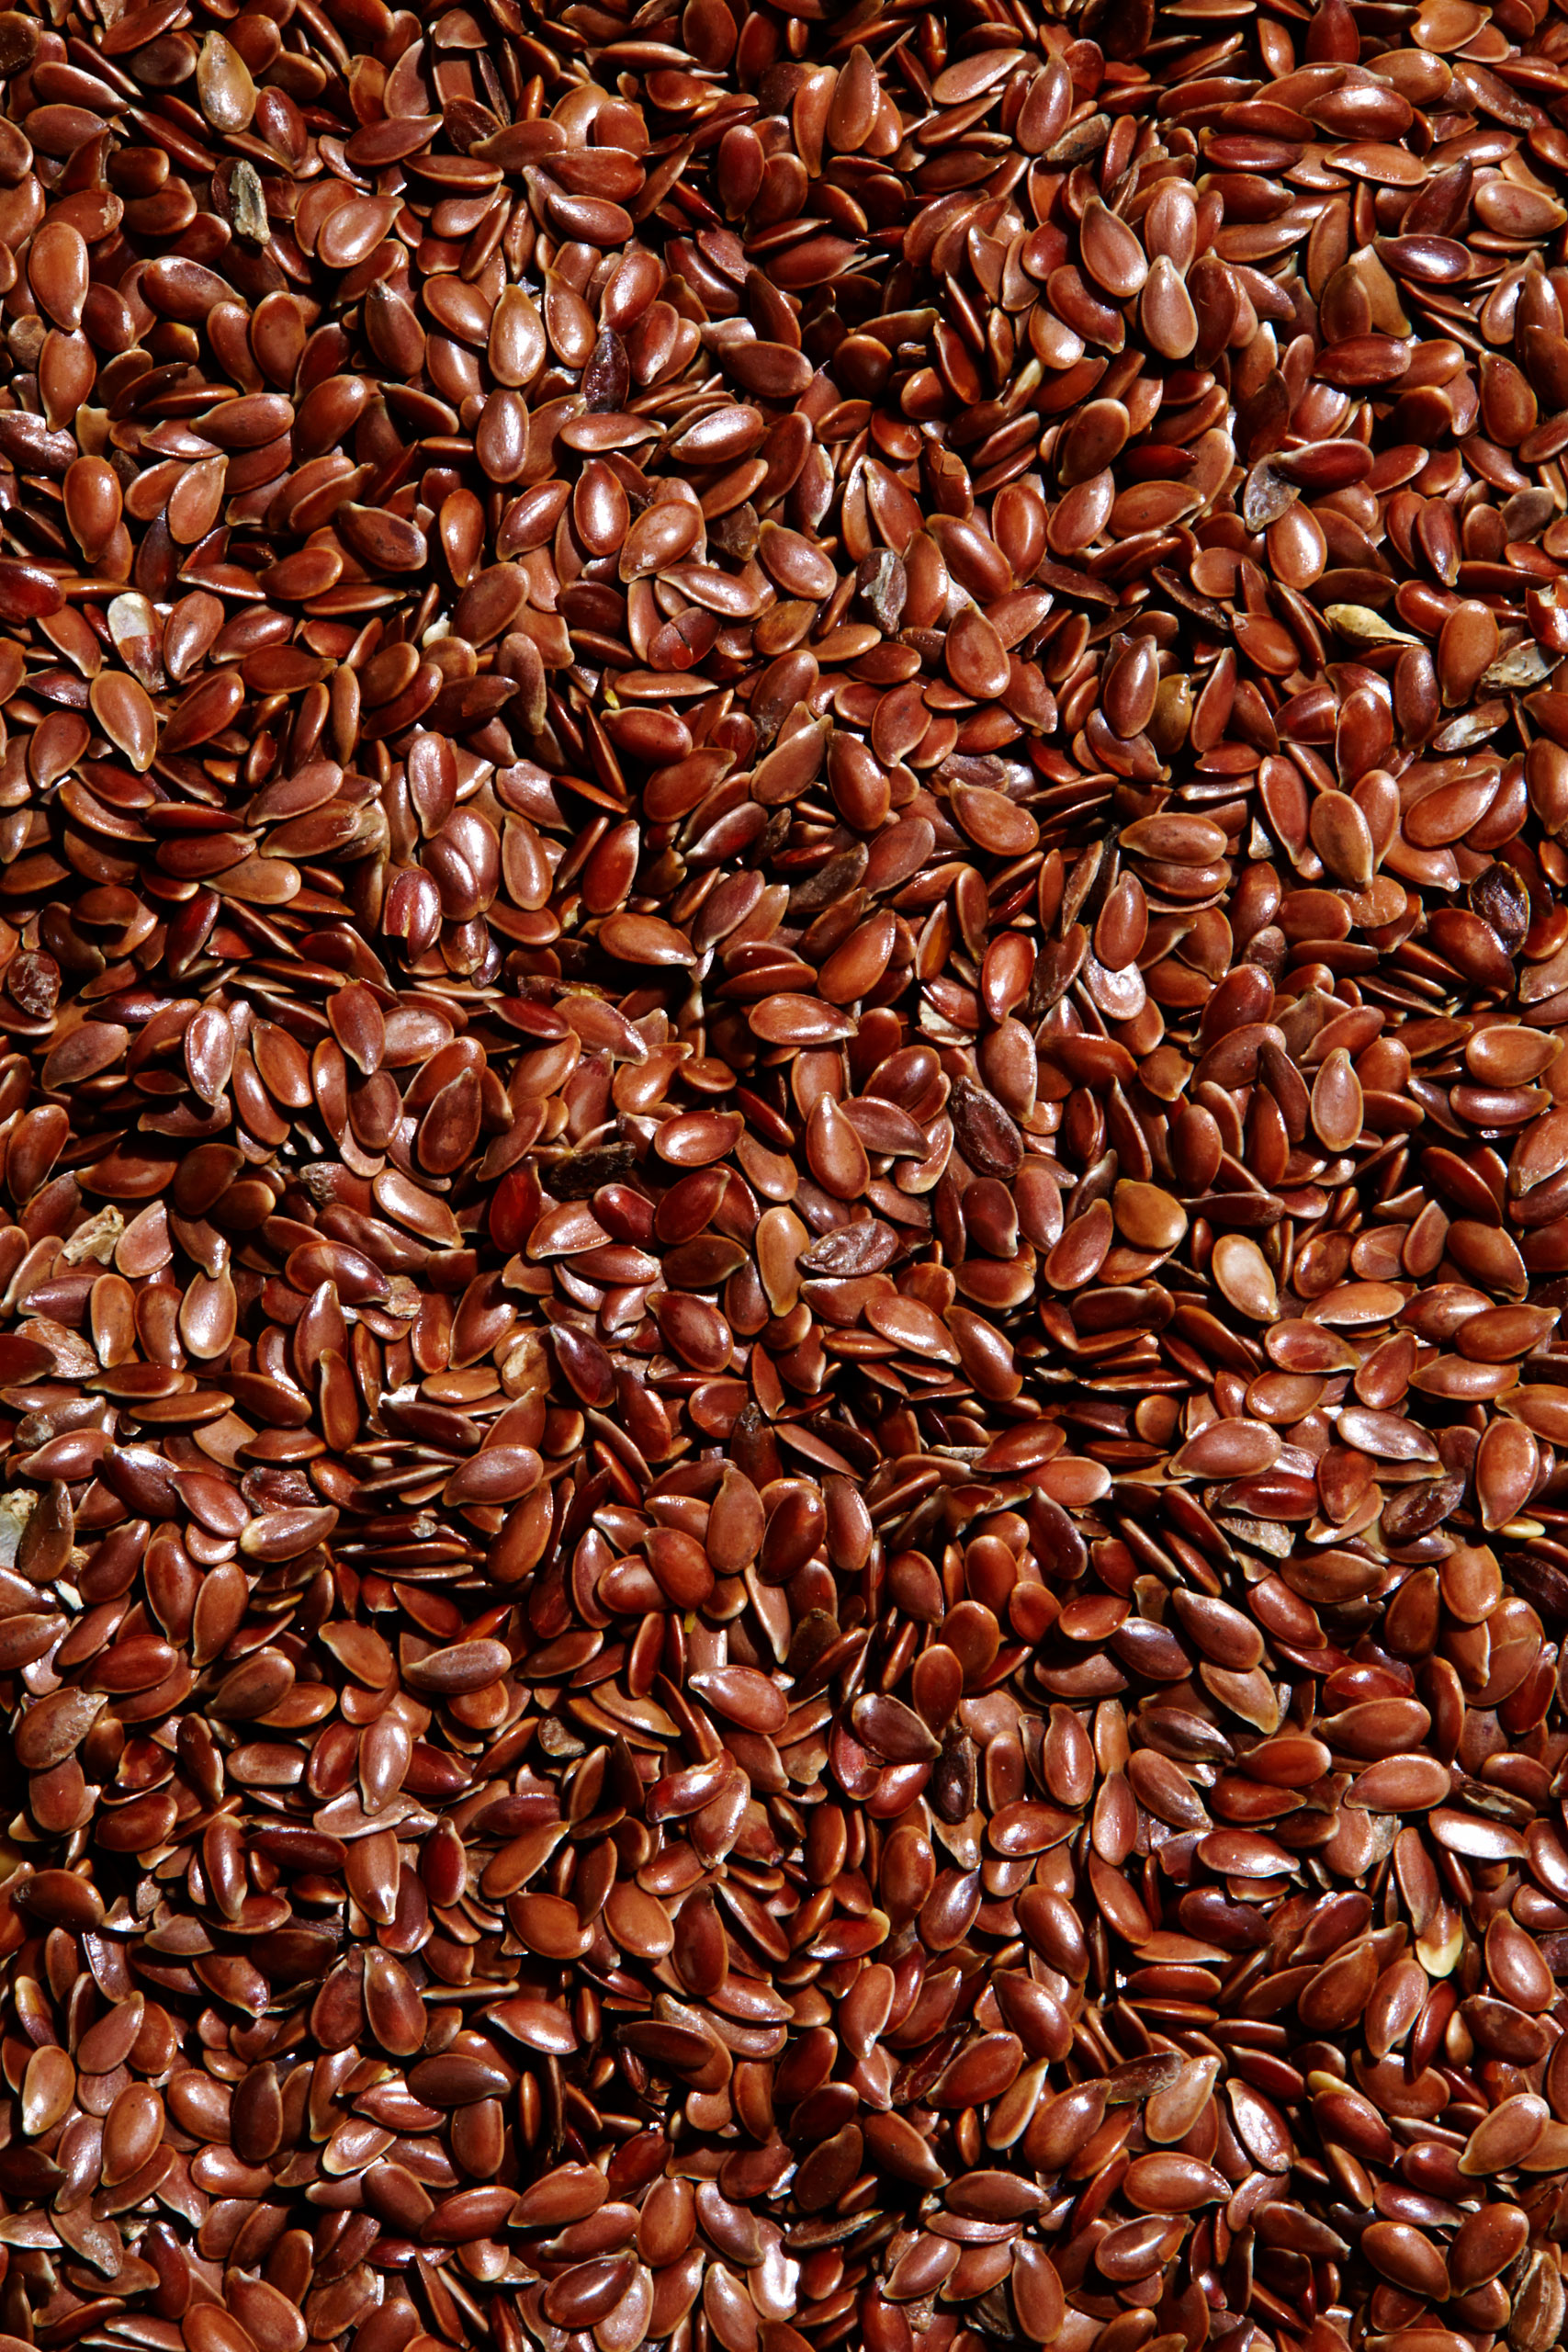 healthiest foods, health food, diet, nutrition, time.com stock, flax seeds